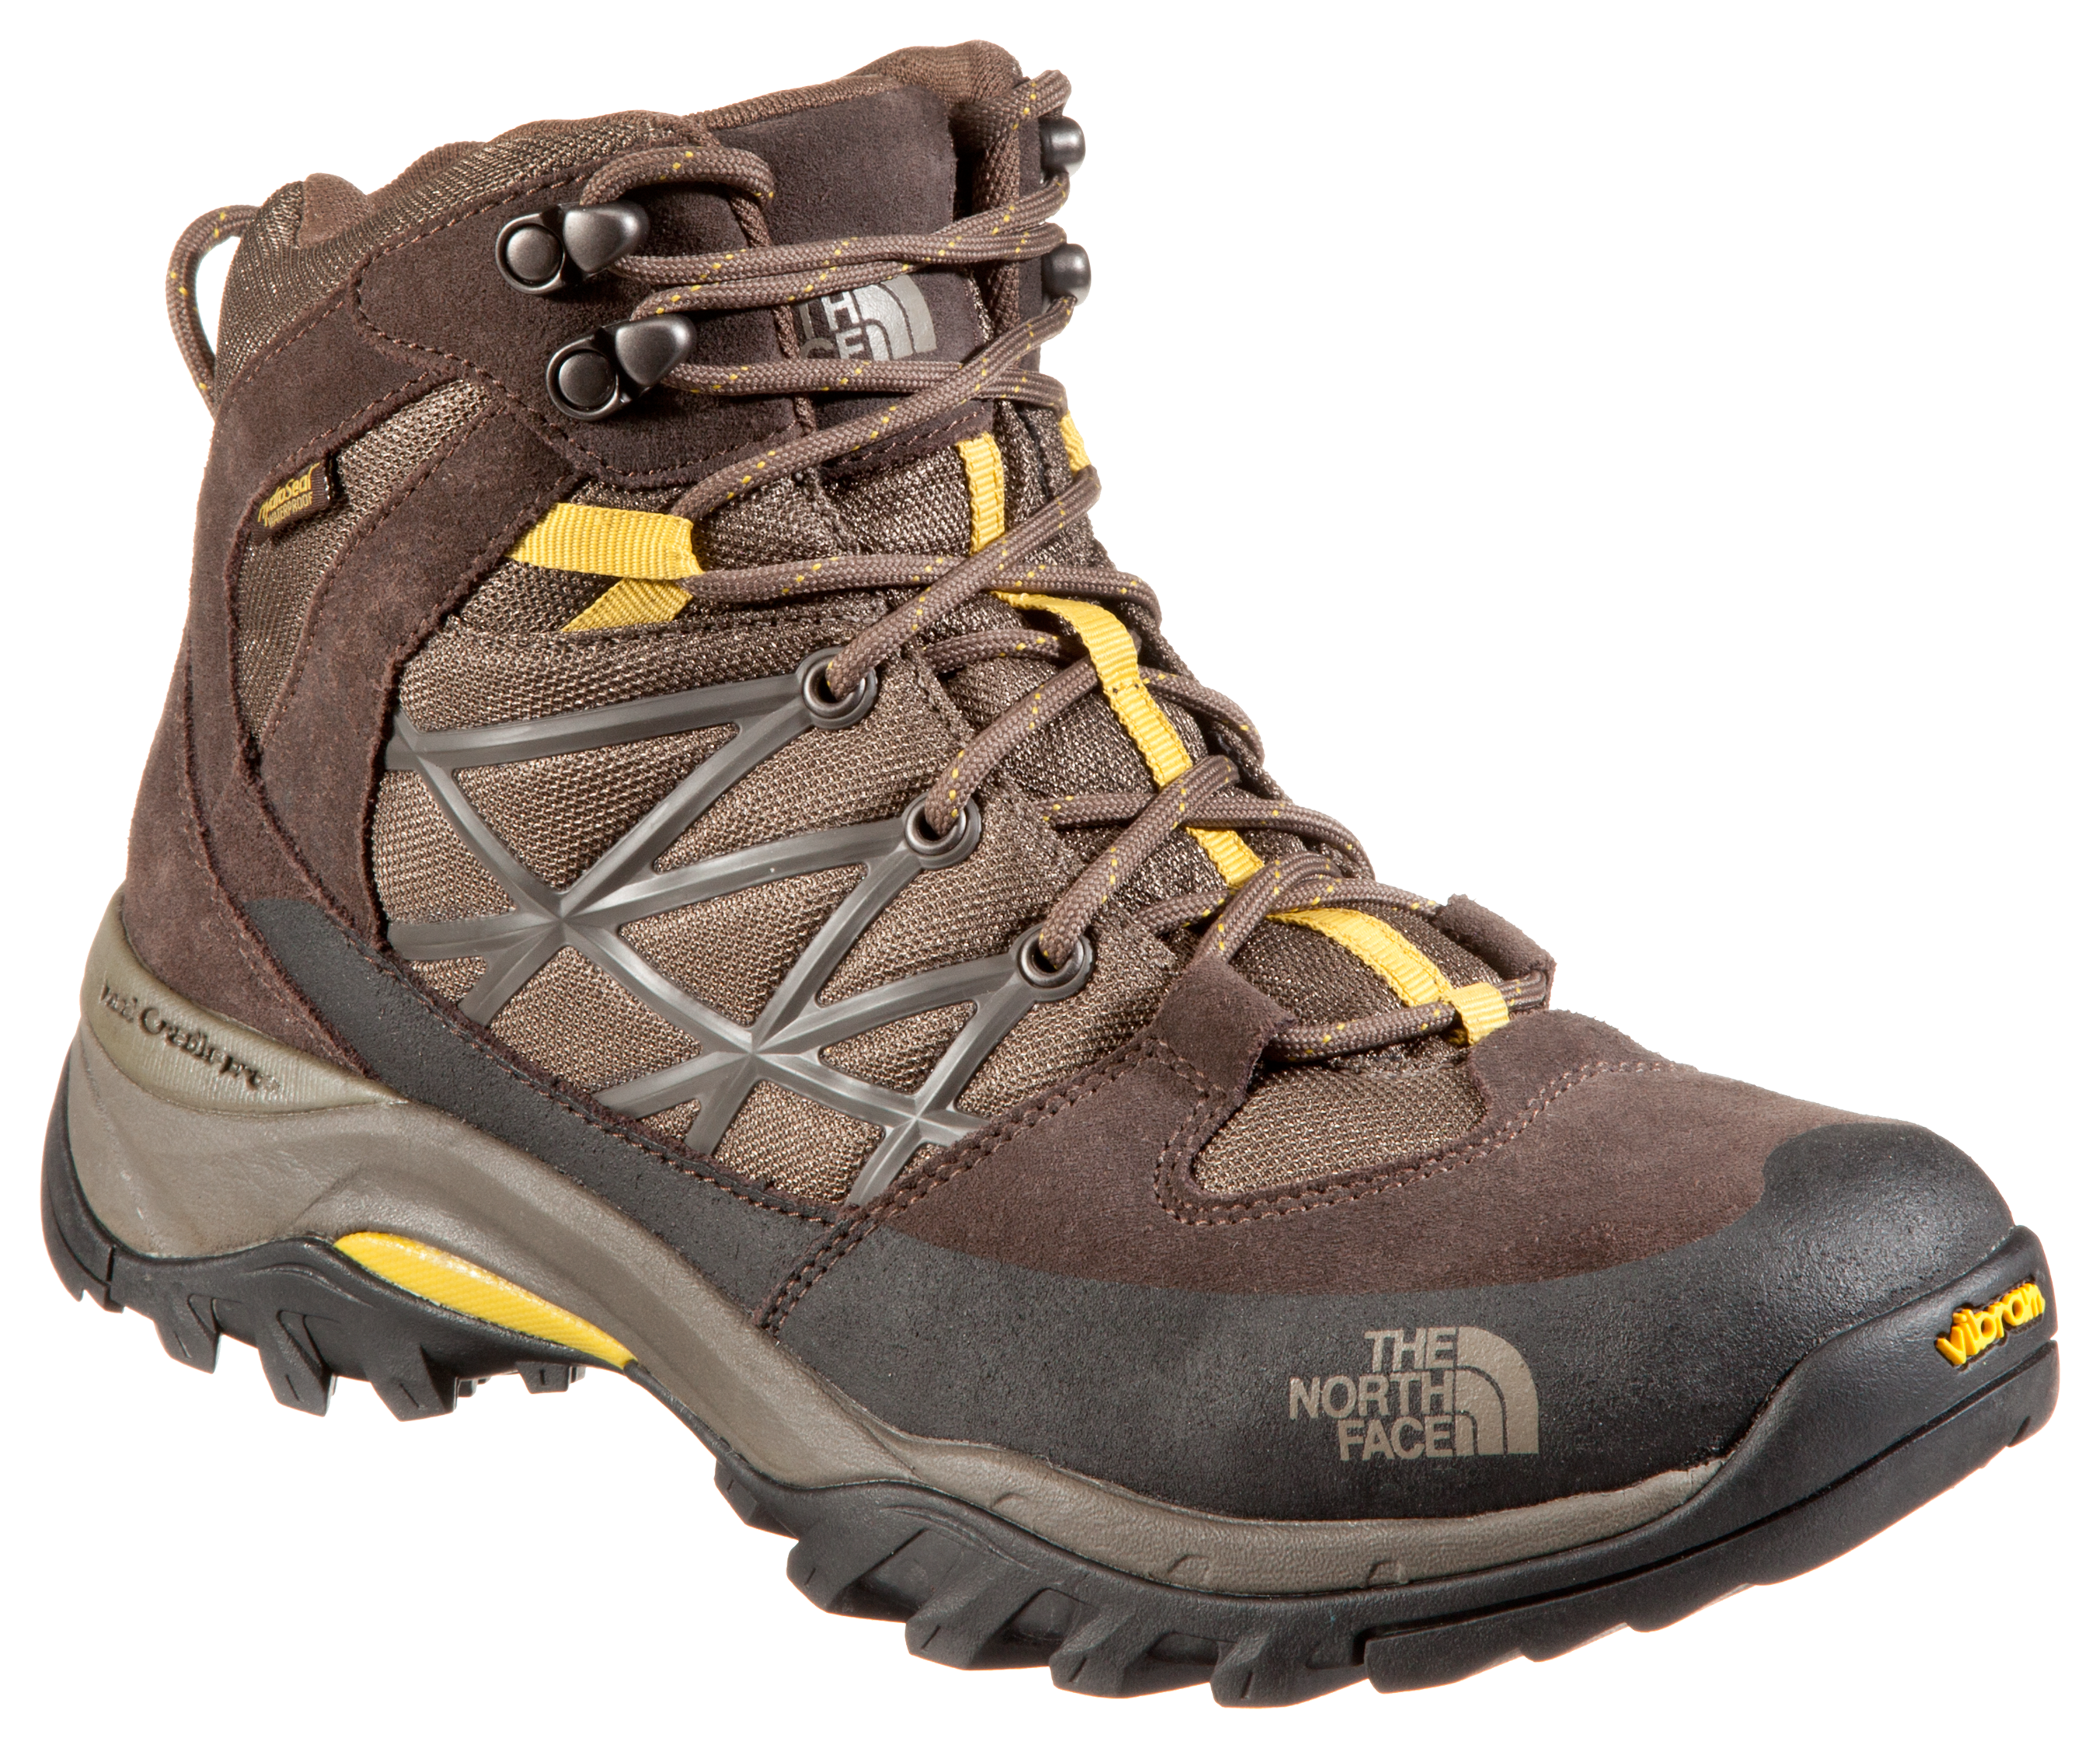 The North Face Storm Mid Waterproof Hiking Boots for Men | Bass Pro Shops